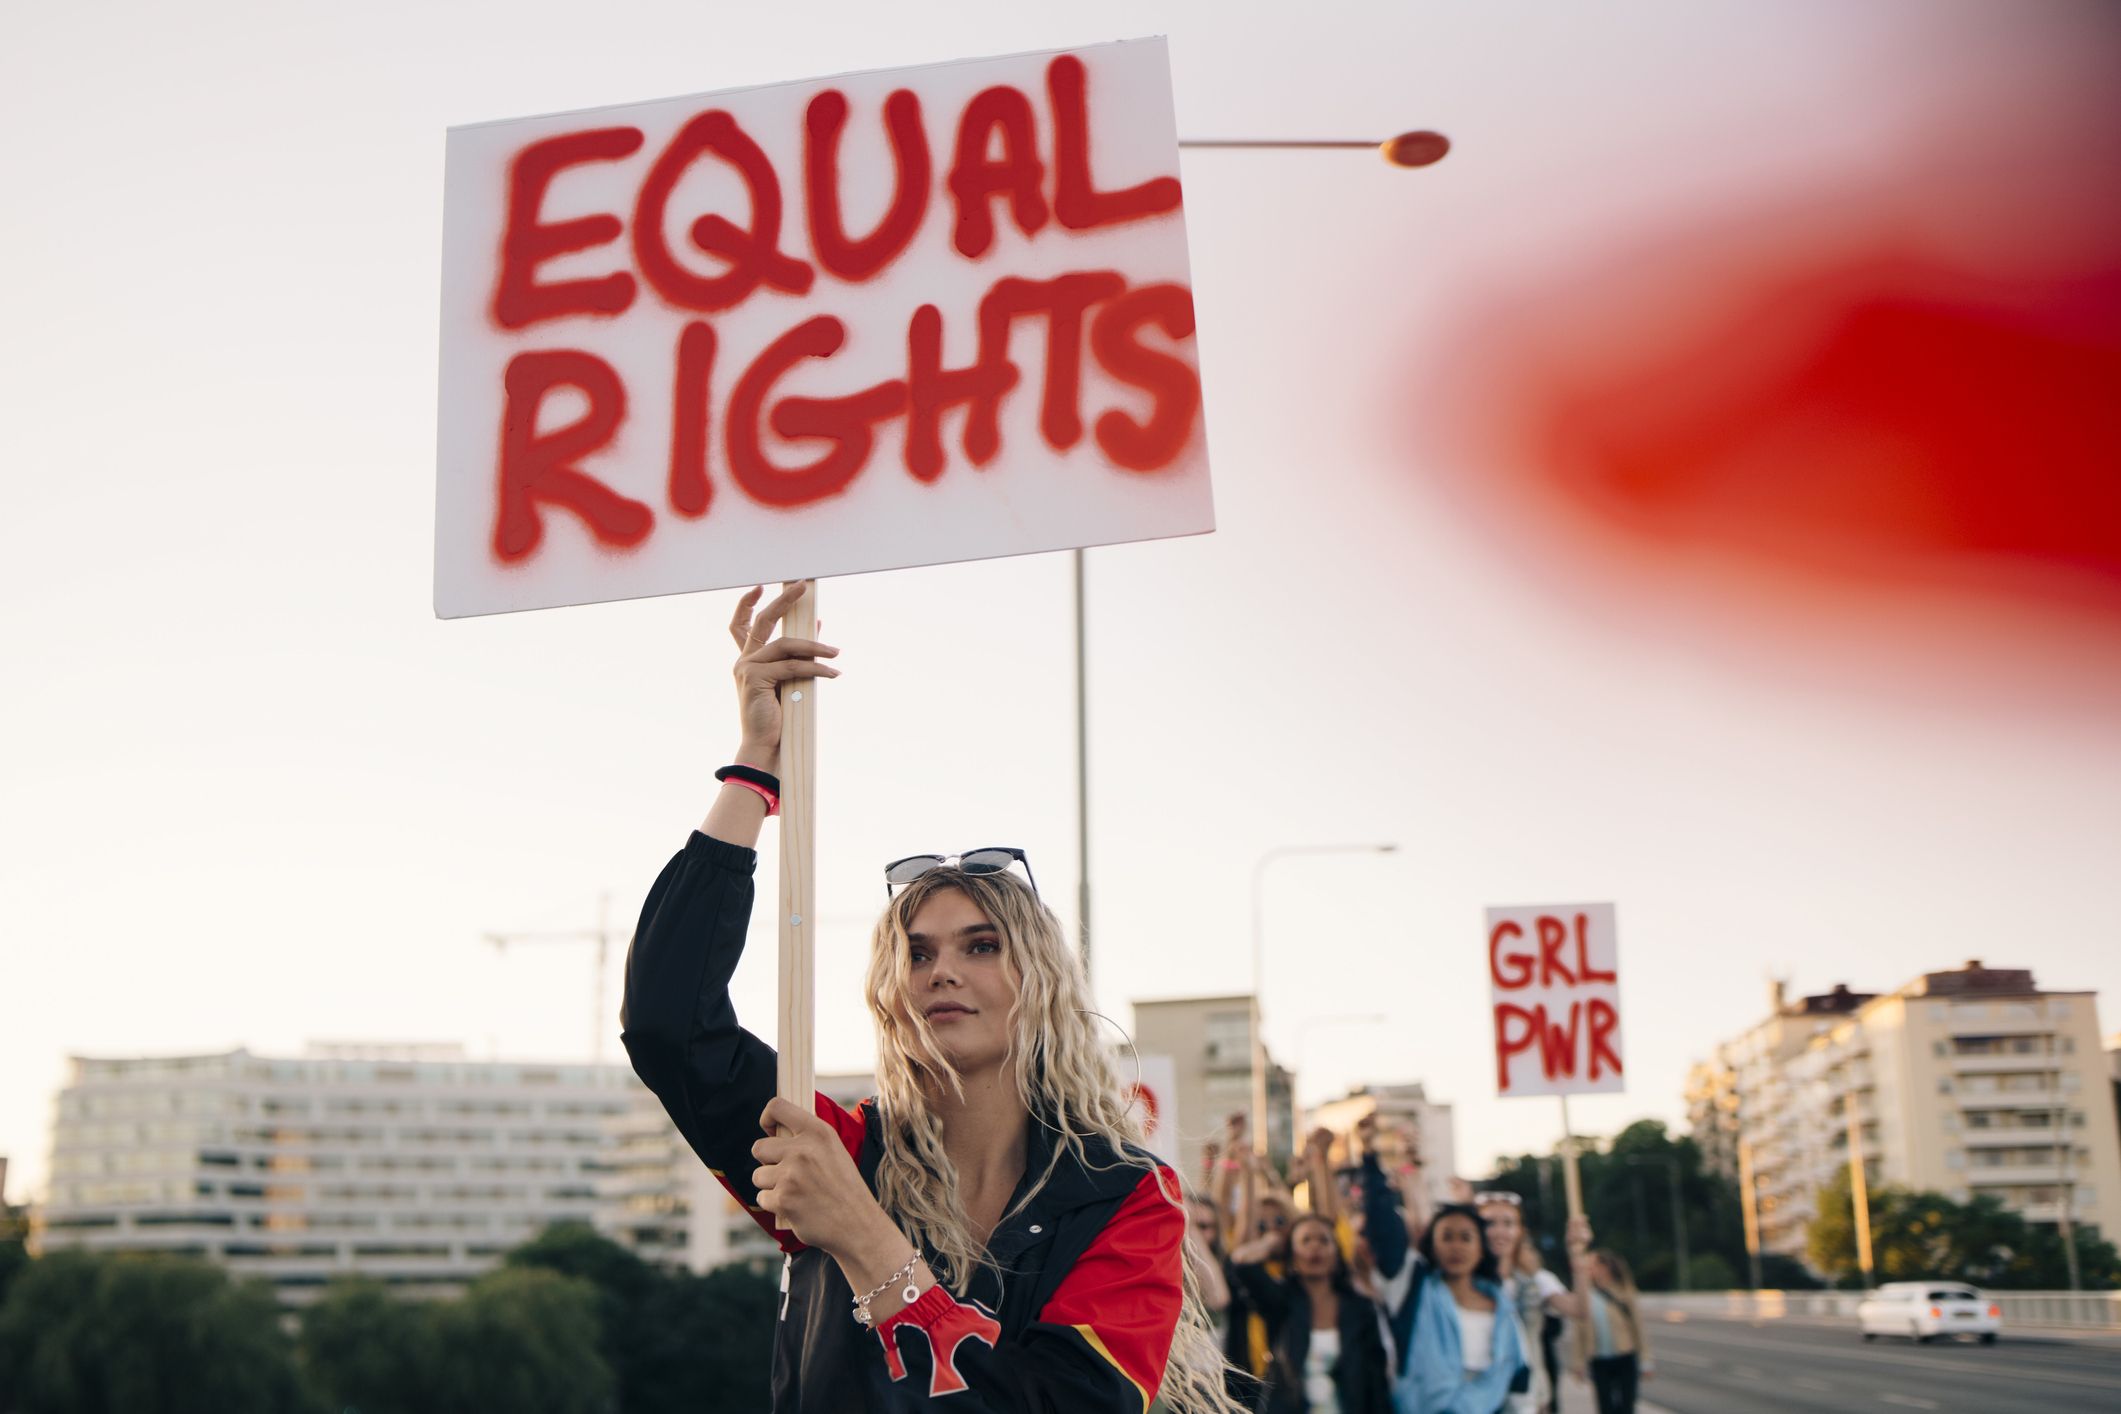 Feminism The March Toward Equal Rights for Women 